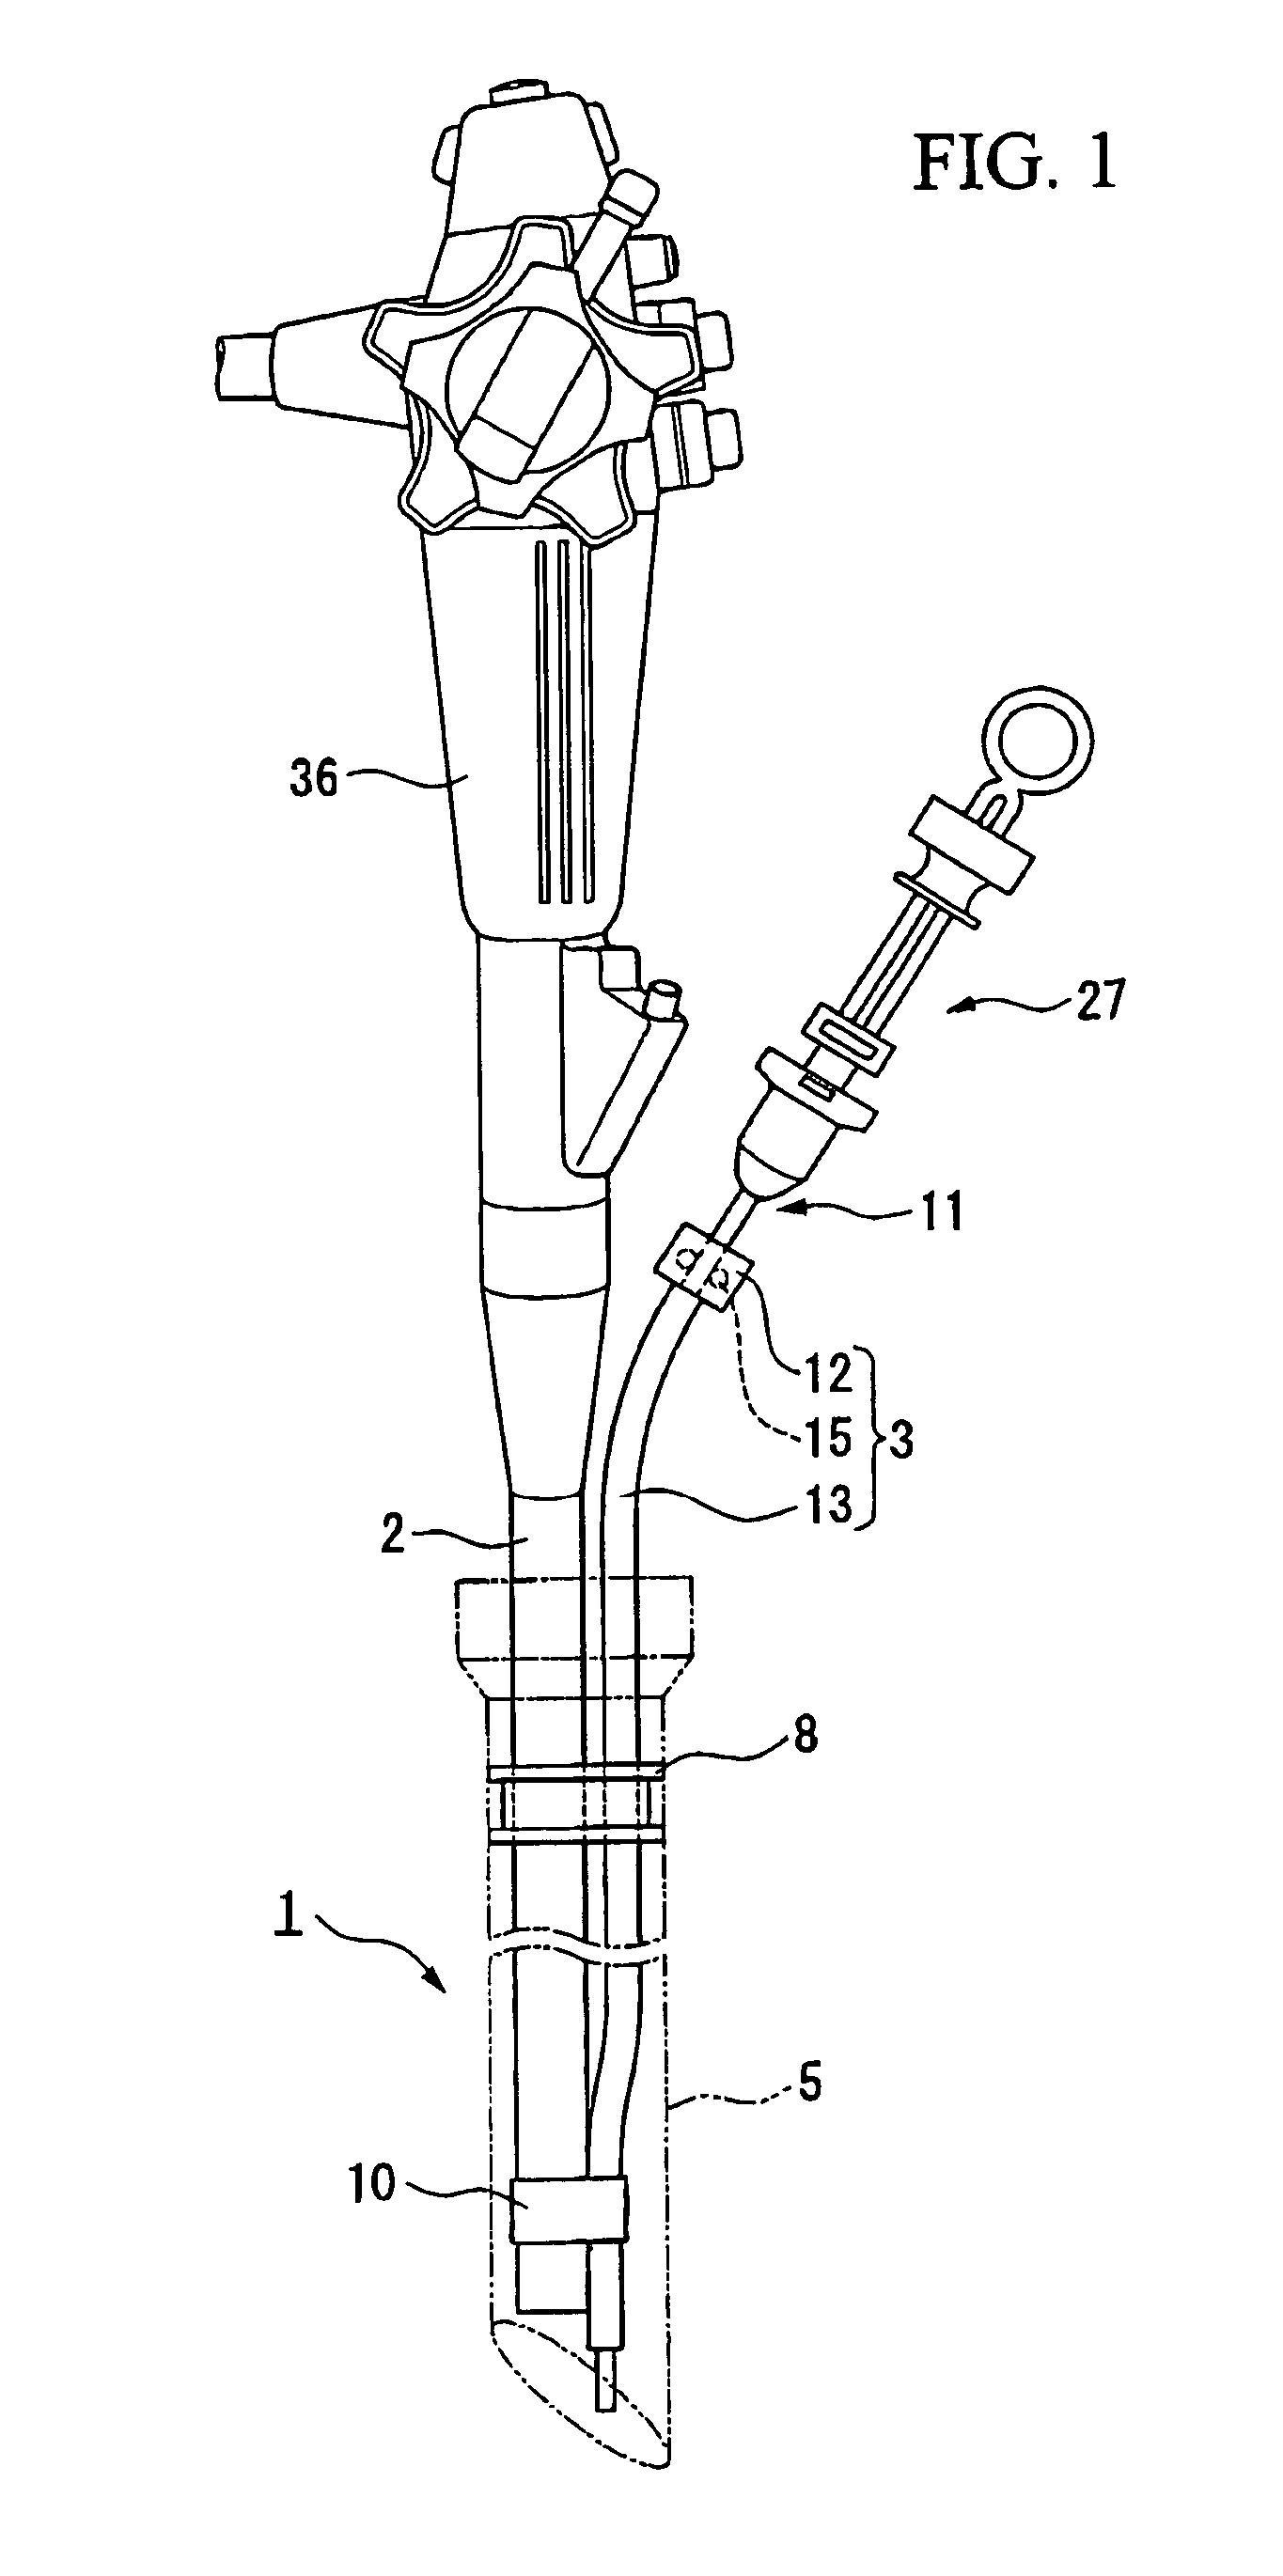 Insertion auxiliary implement